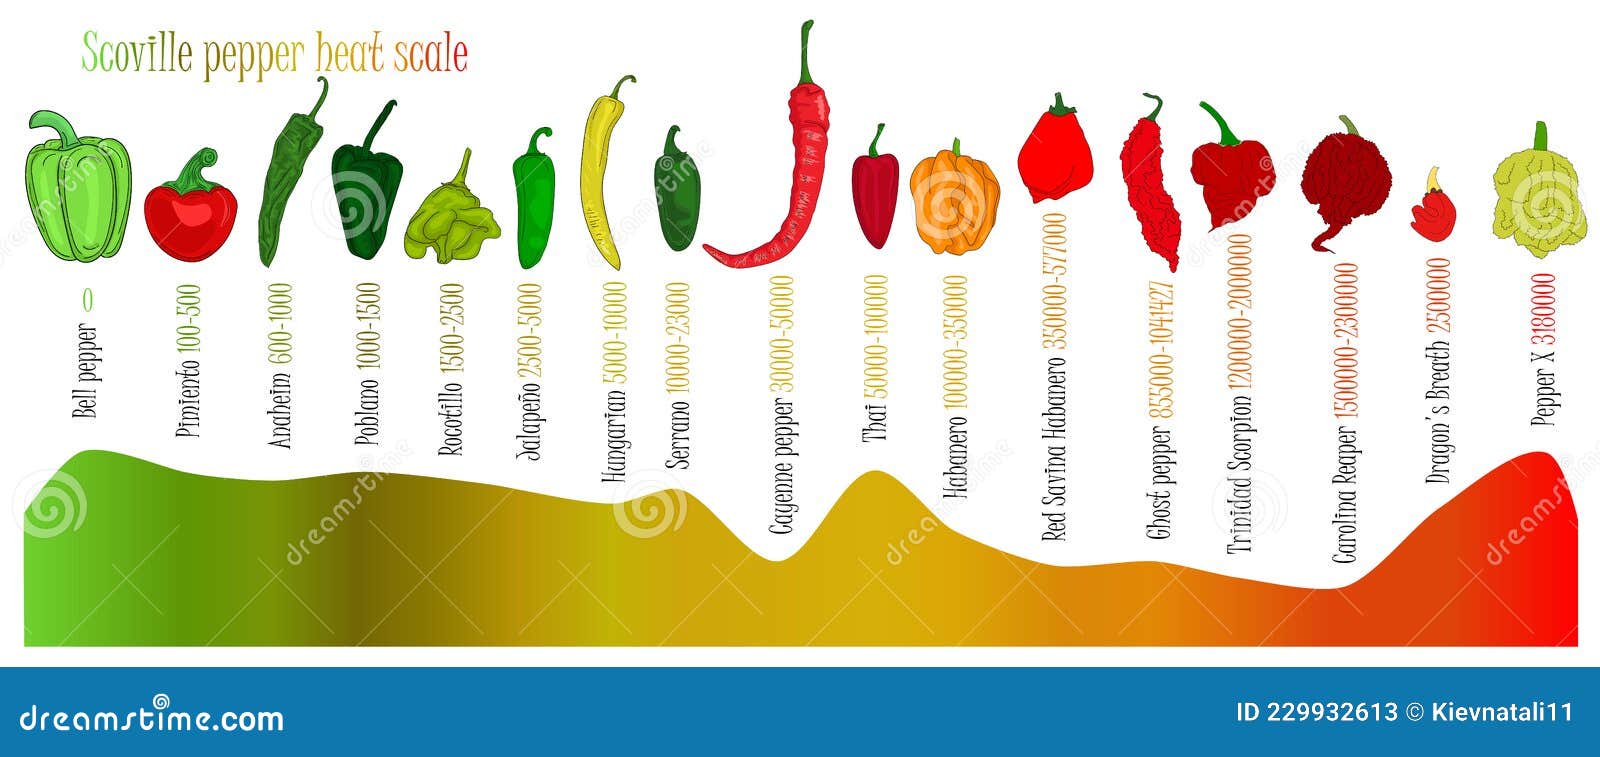 scoville pepper heat scale. pepper  from sweetest to very hot